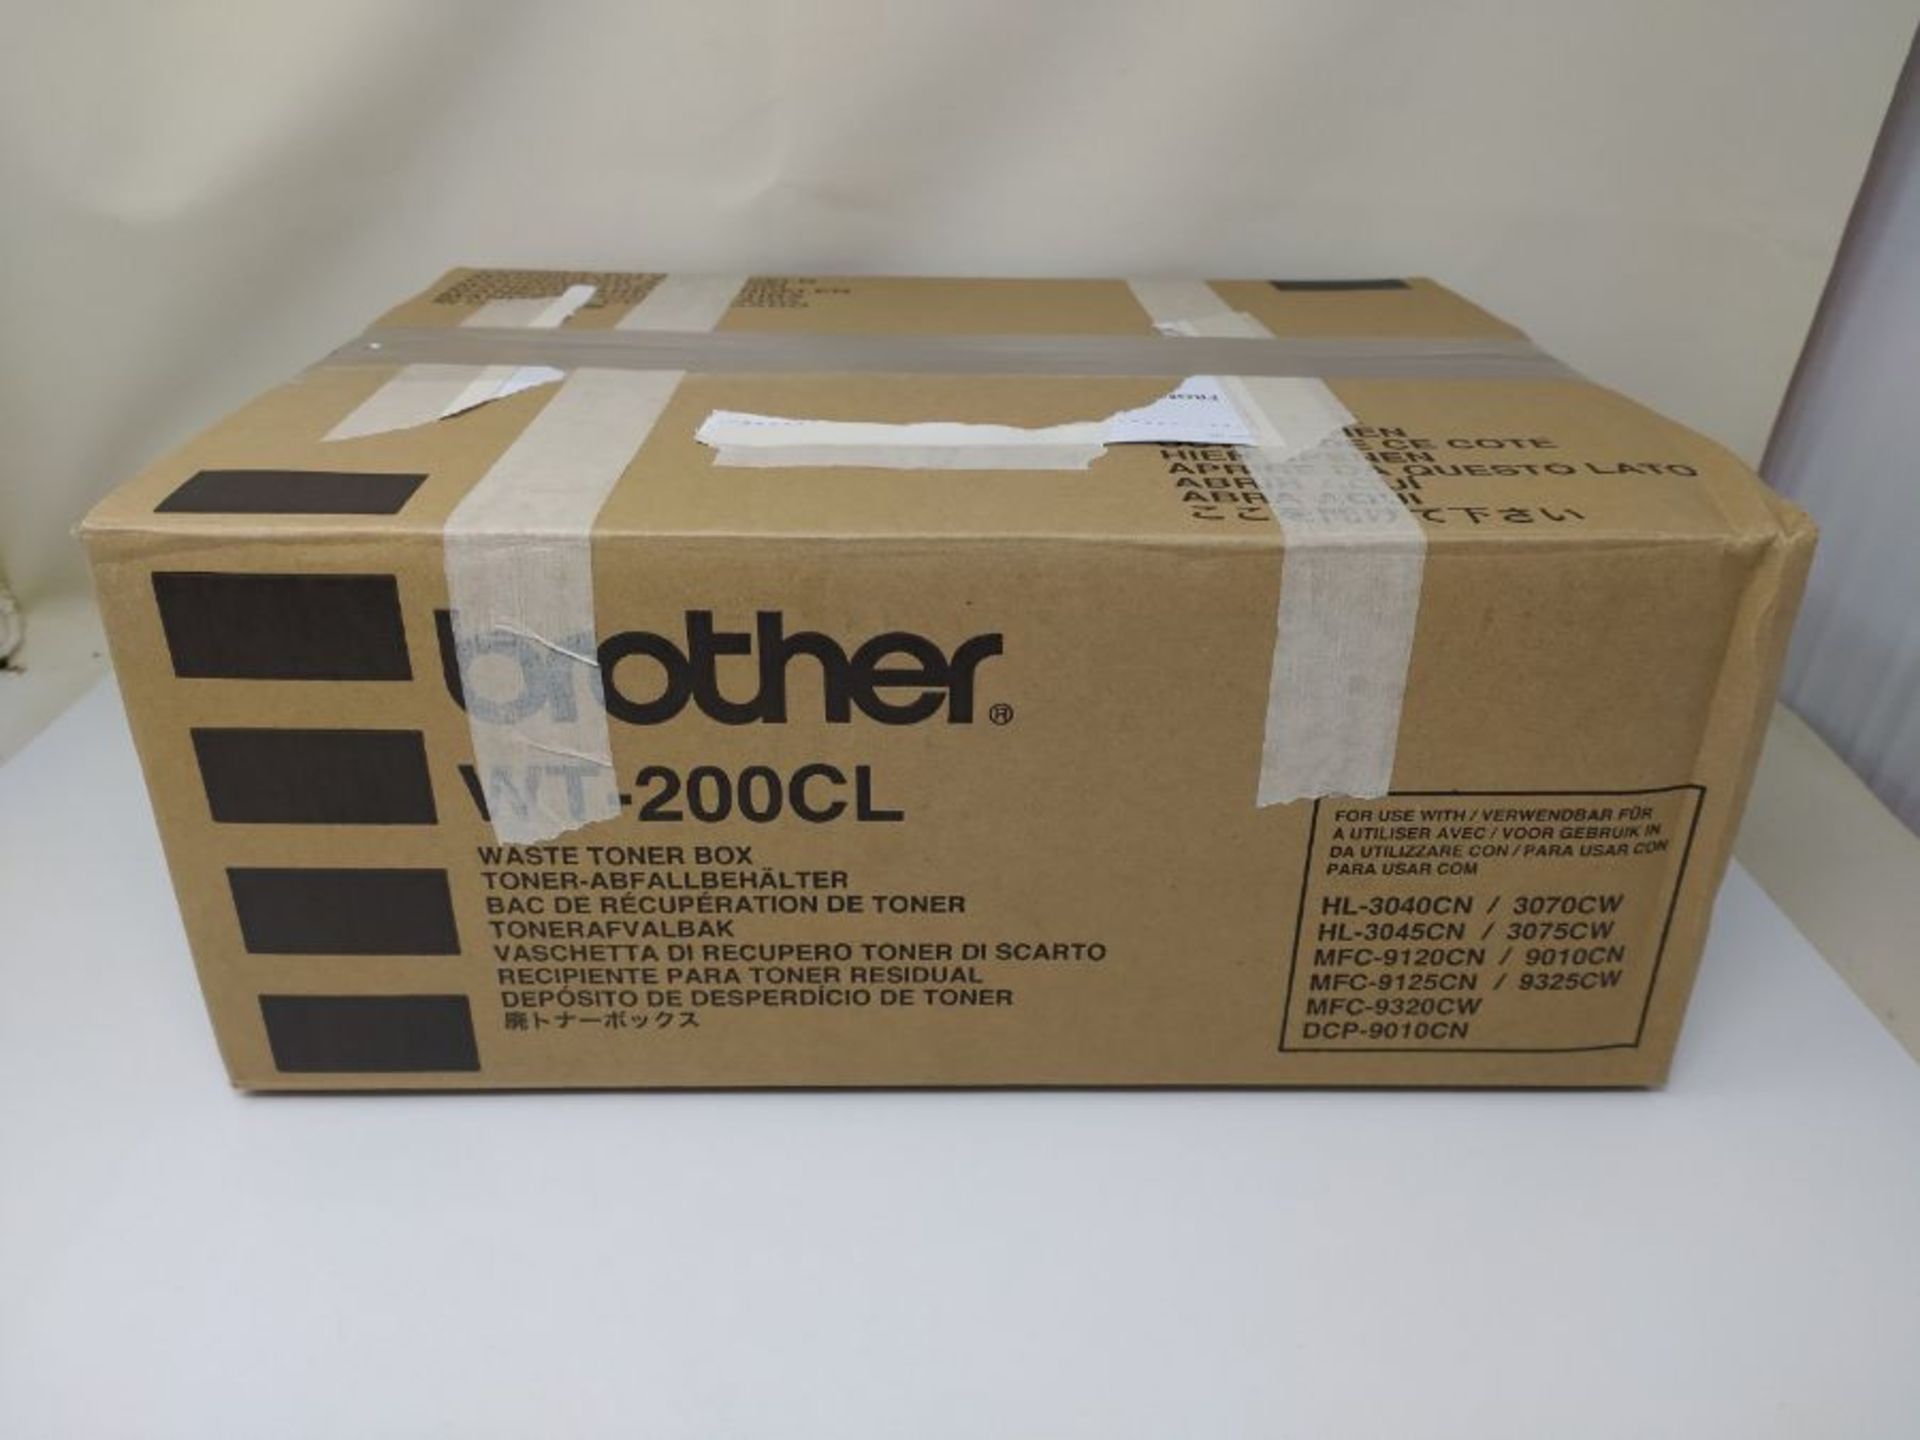 Brother WT-200CL Waste Toner Unit, Genuine Supplies - Image 2 of 3